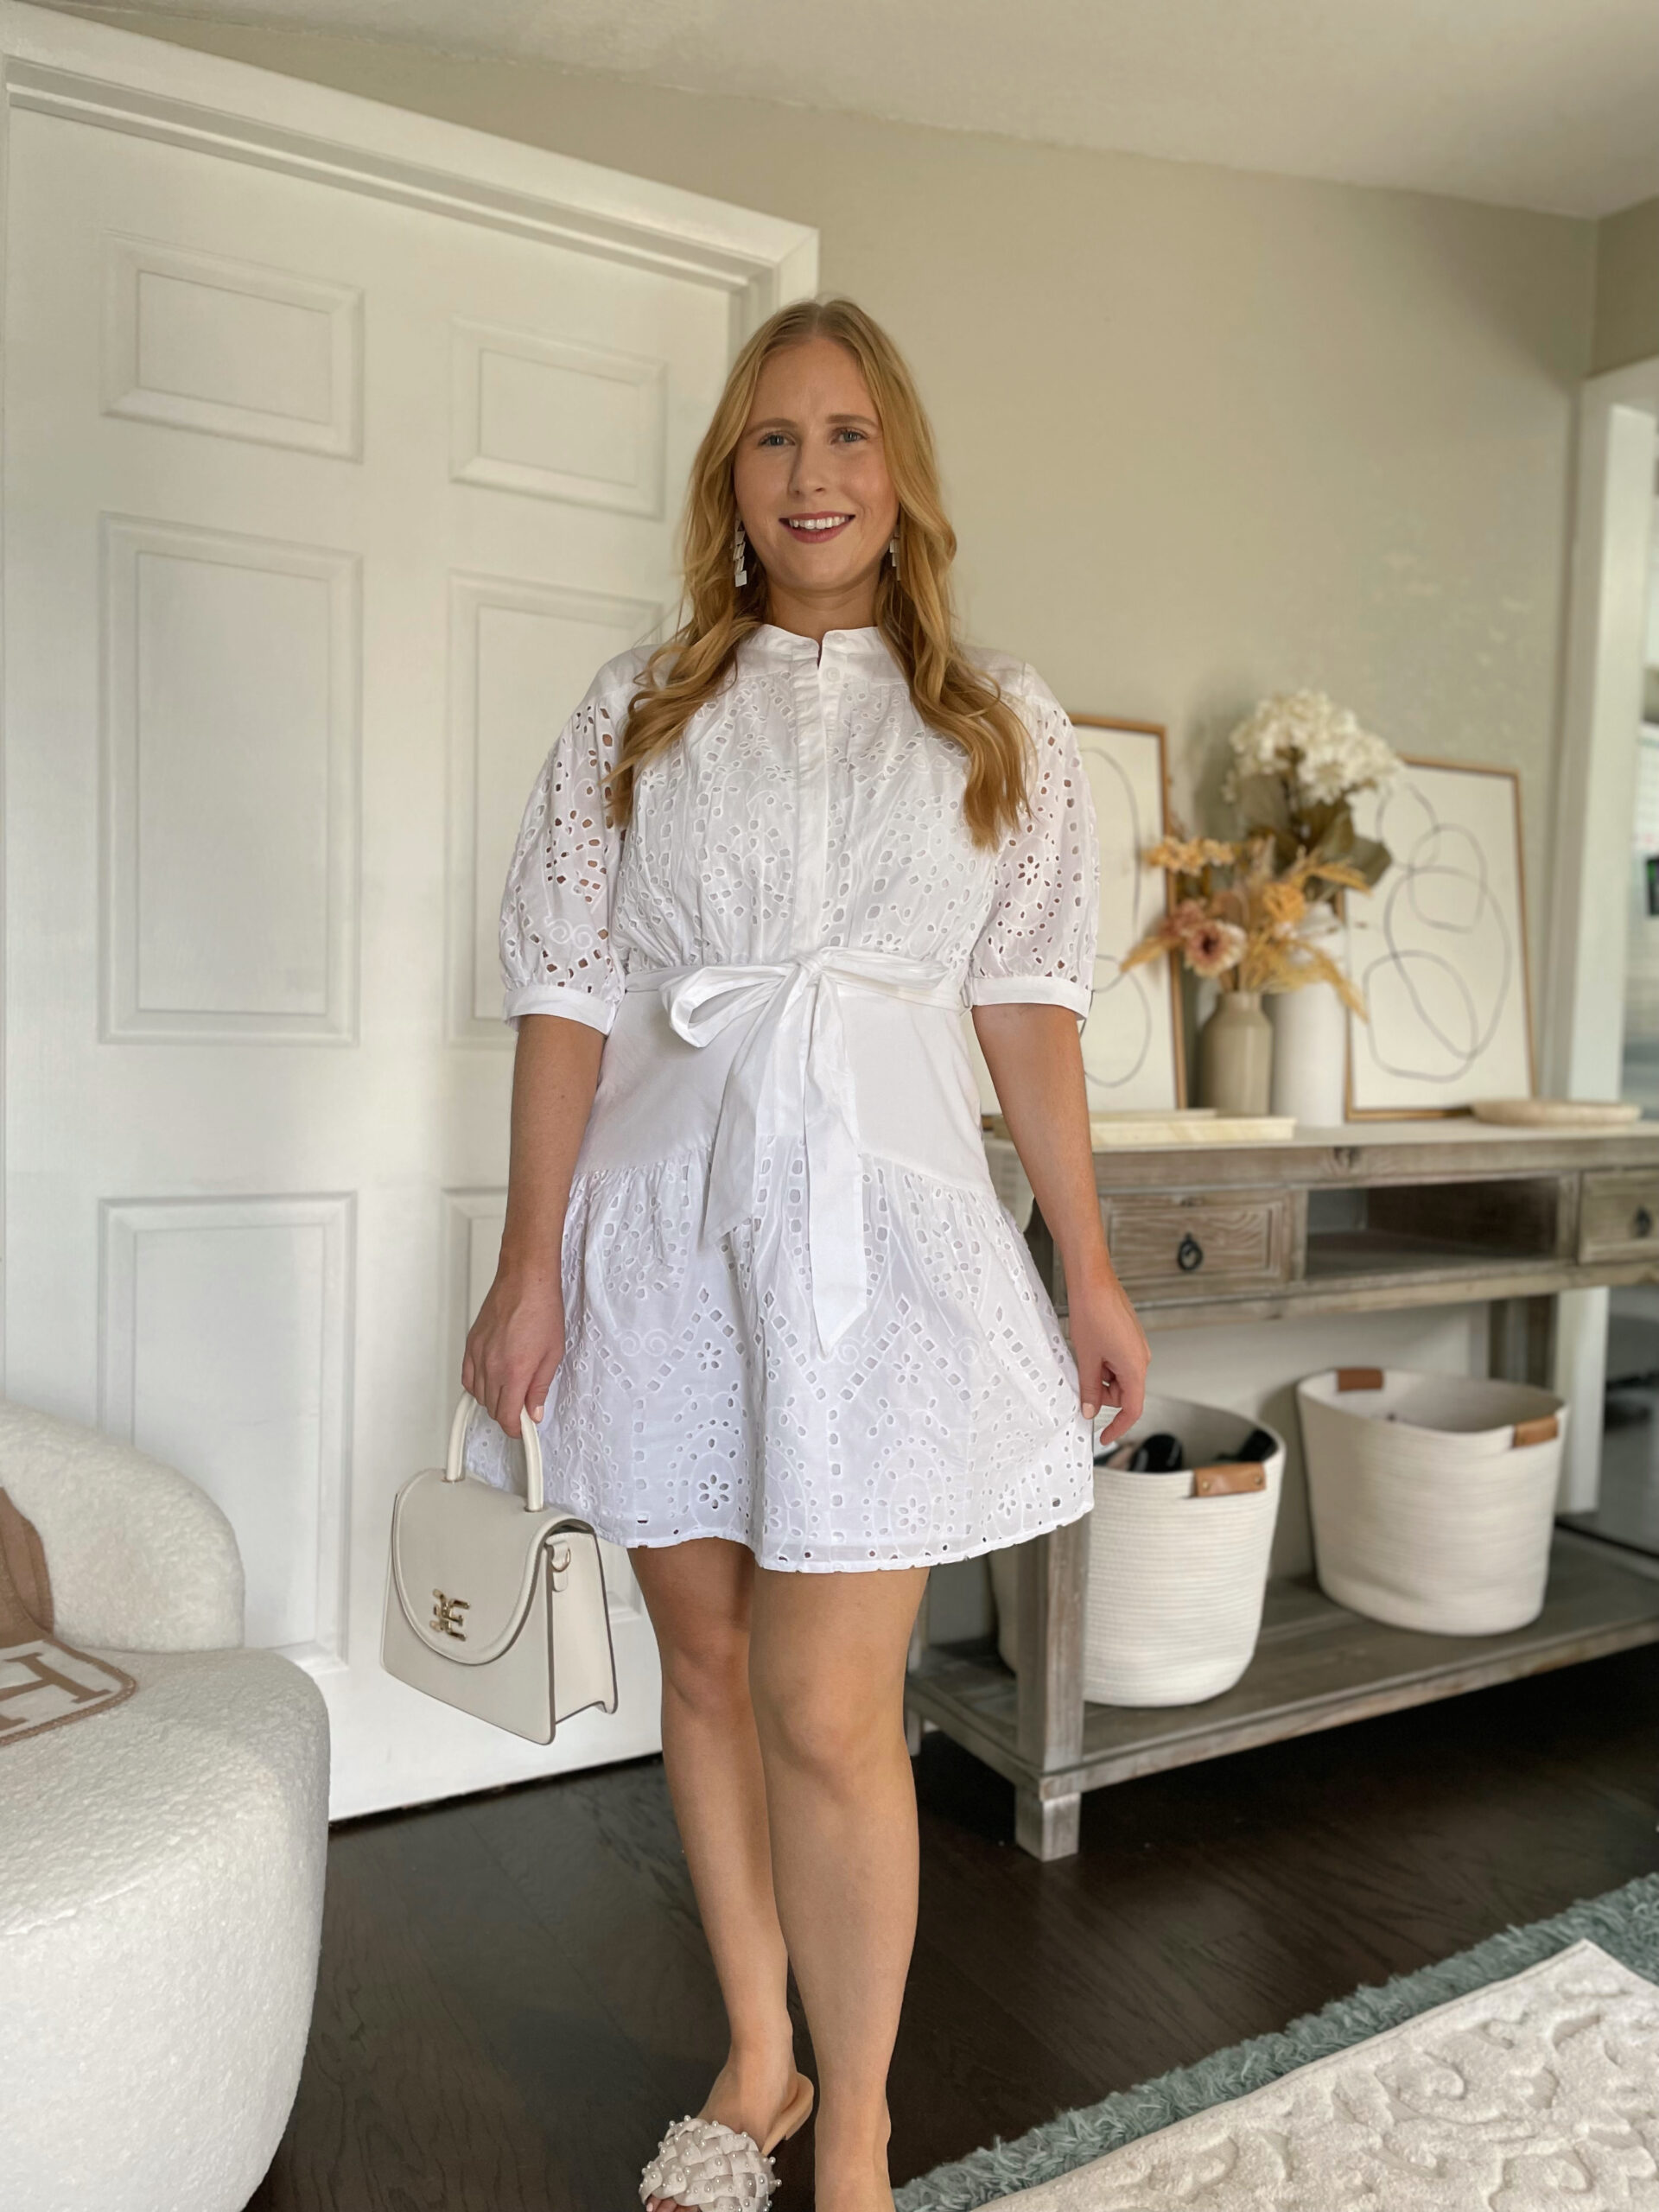 Scoop Women's Eyelet Short Shirt Dress with Volume Sleeves | Affordable by Amanda shares cute summer dresses for summer under $100 | White eyelet shirt dress from Walmart 